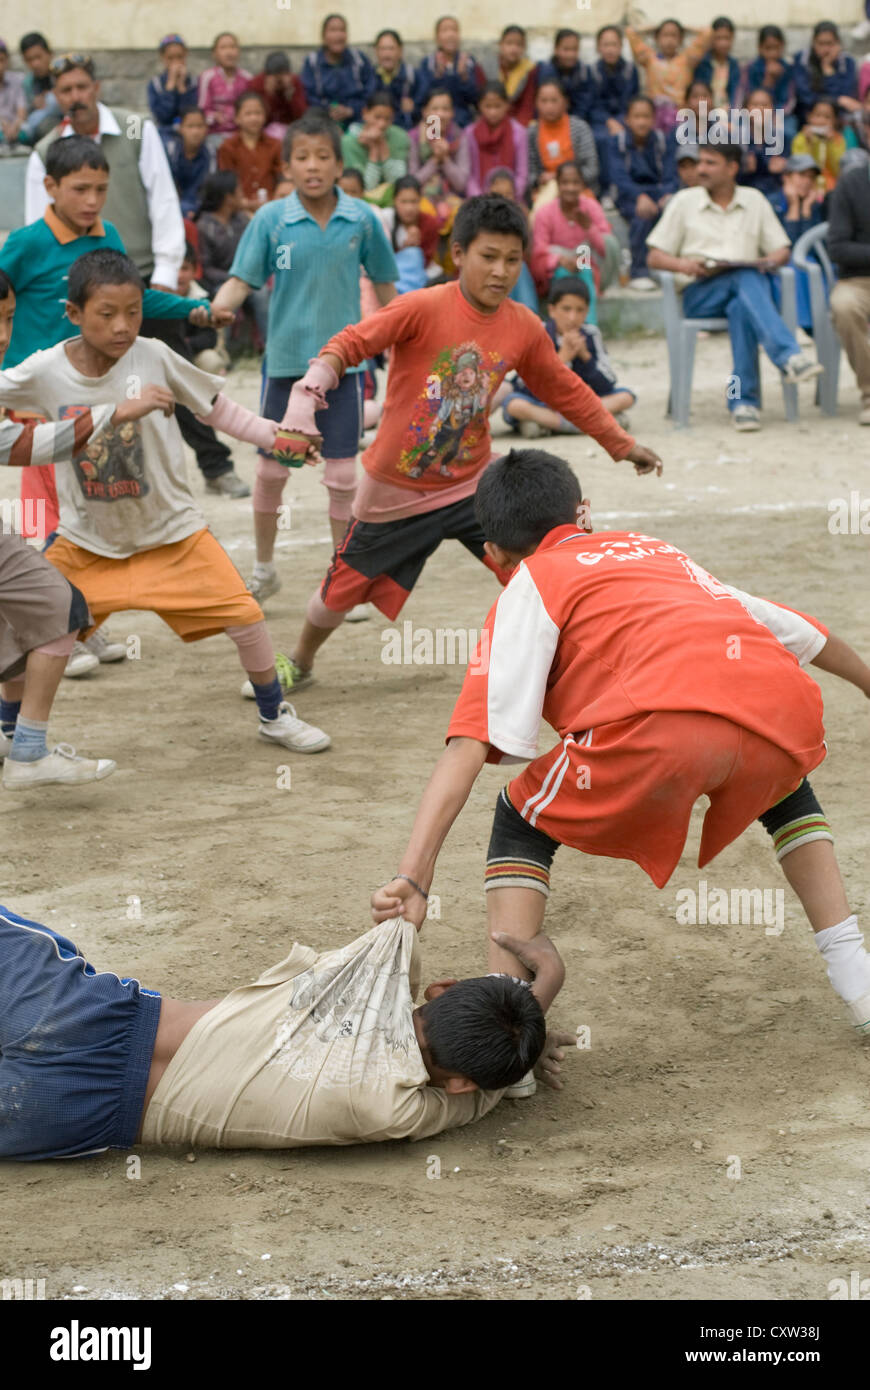 Boys from different schools compete at Kabaddi in Keylong, North India Stock Photo